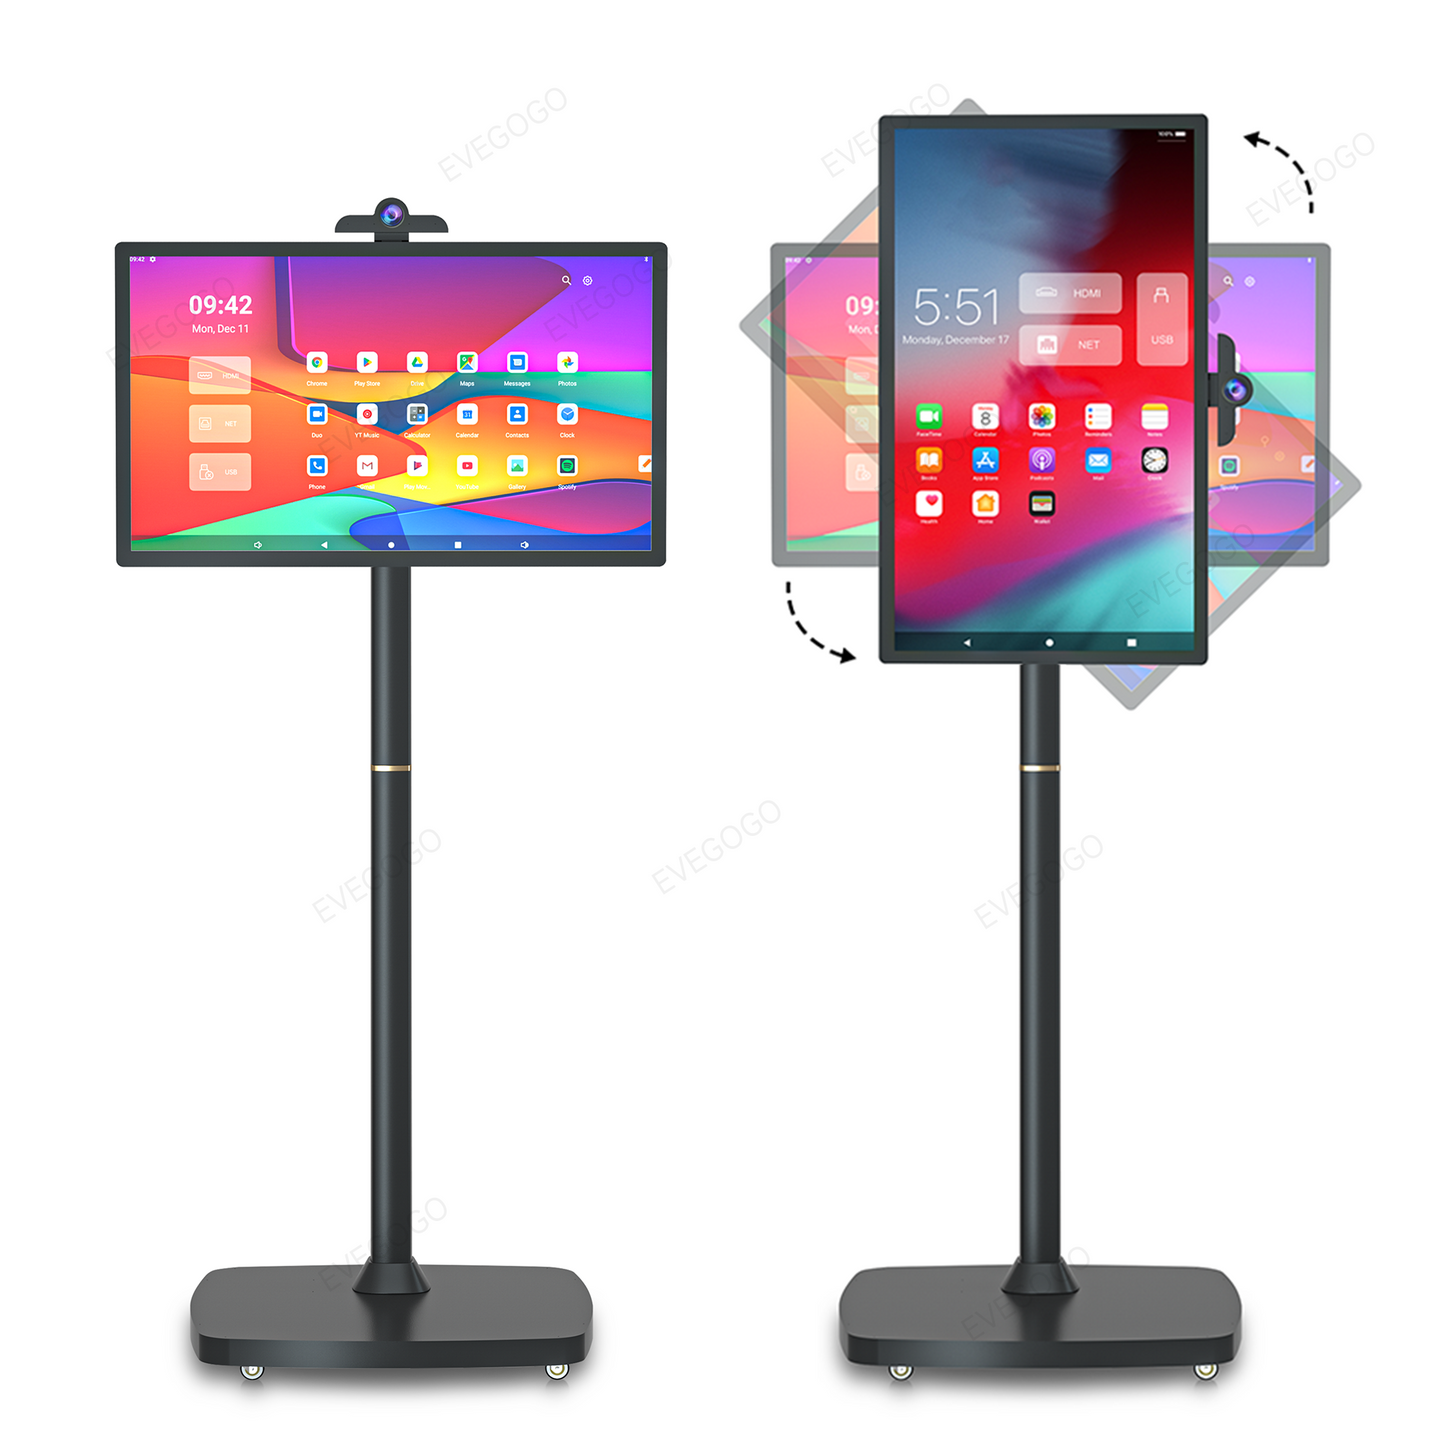 StandbyMe Portable TV Smart Screen Rotatable Monitor,with 1080P HD Touch Screen, Android OS